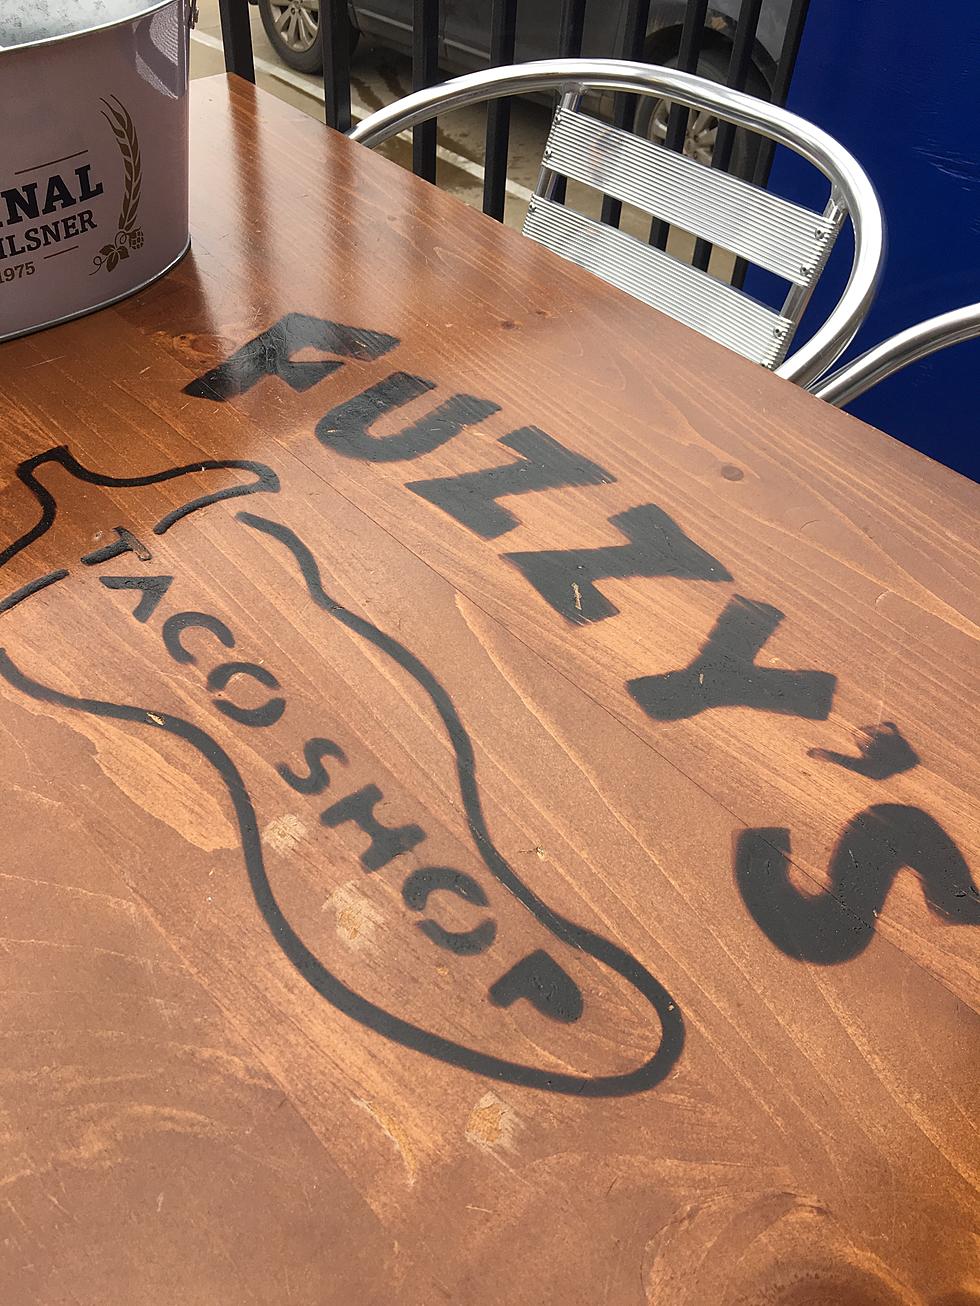 We Got To Check Out Lufkin’s New Fuzzy’s! [PHOTOS]